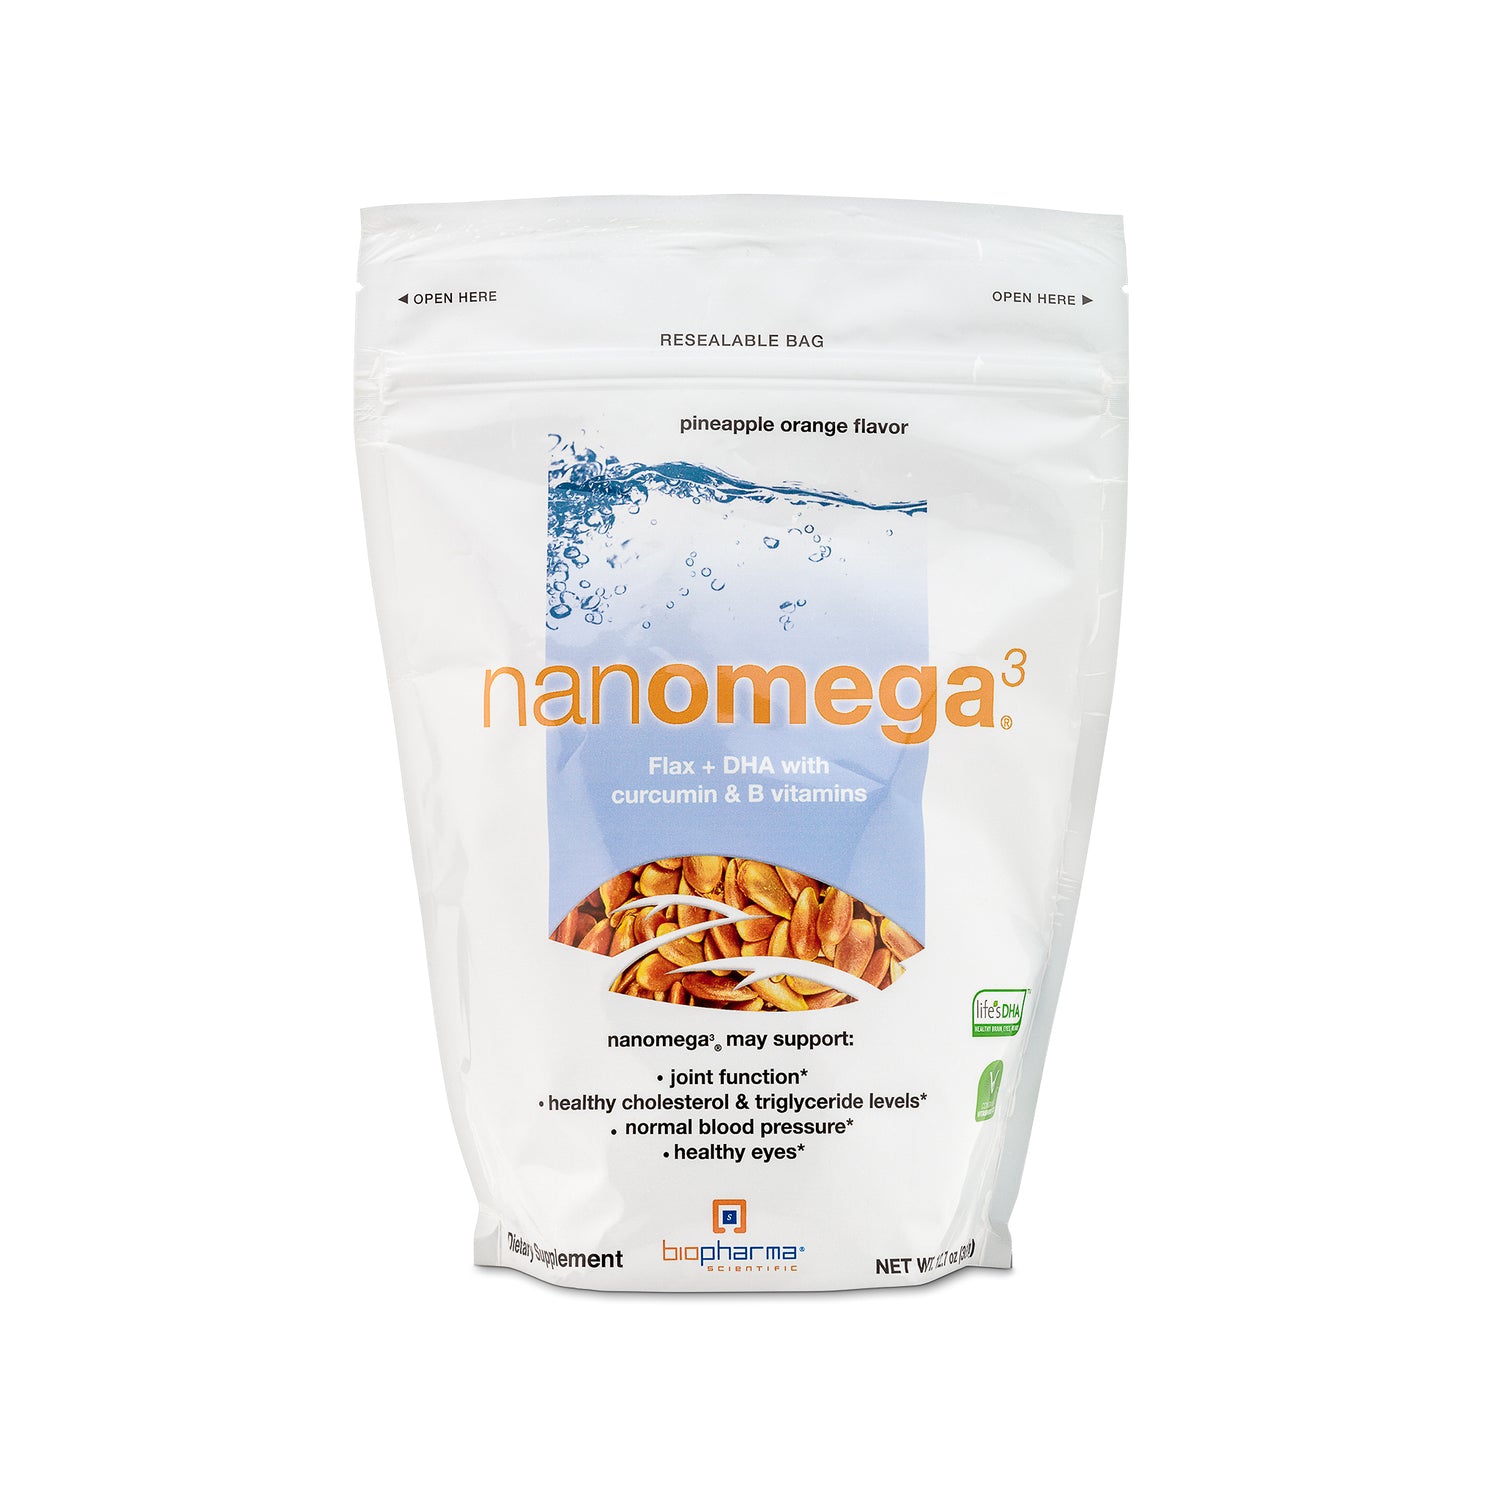 nanomega omage 3 flax dha curcumin supplement - front side